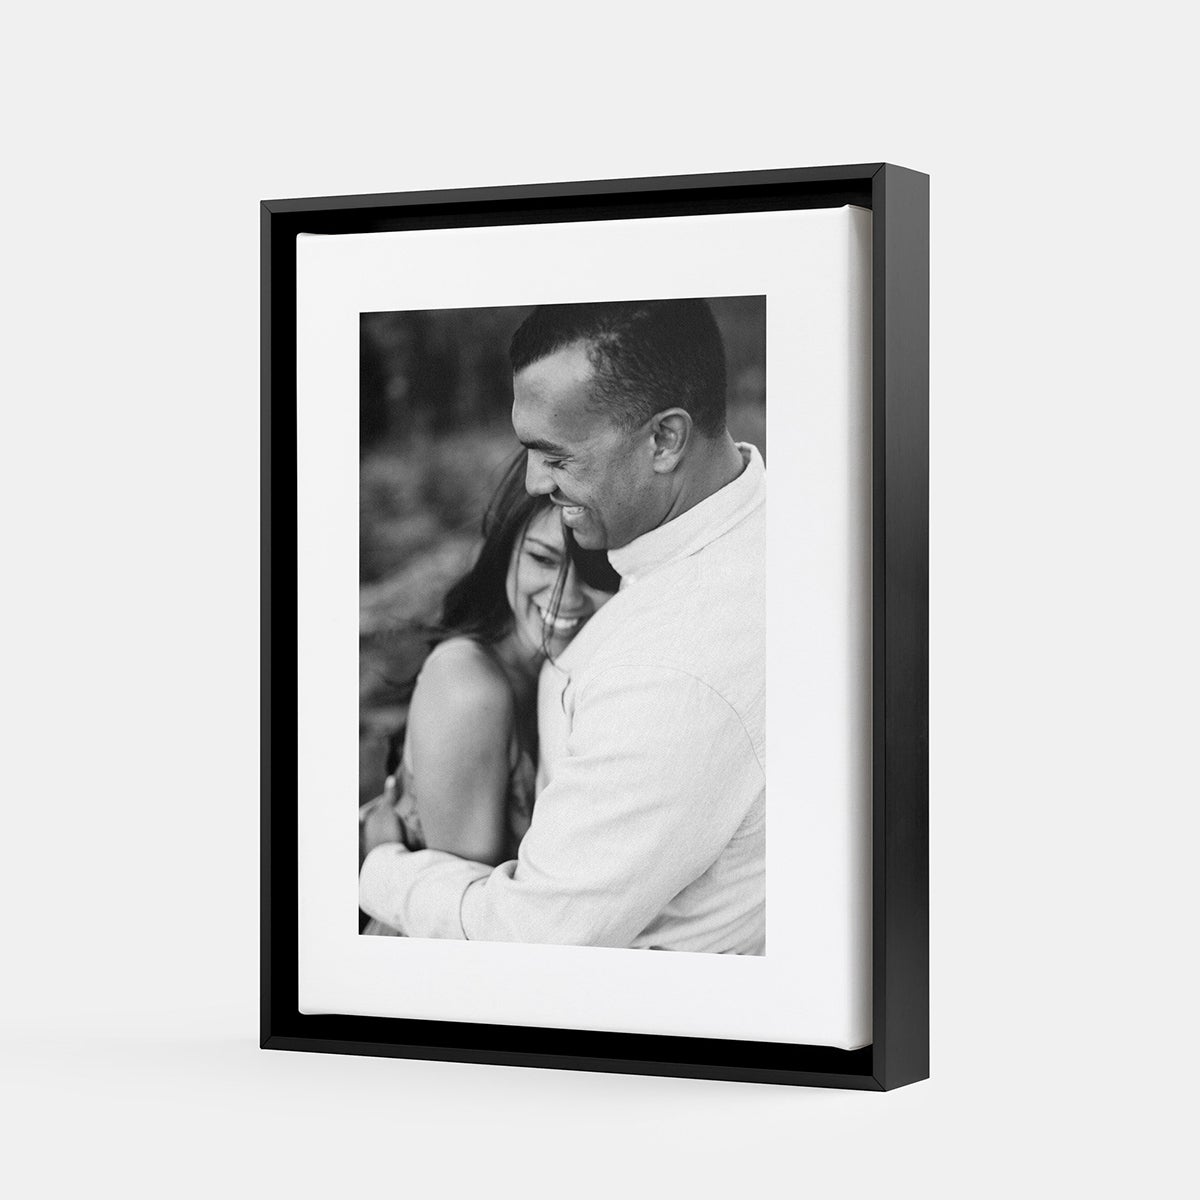 Framed Canvas Print of a wedding photo printed by Artifact Uprising